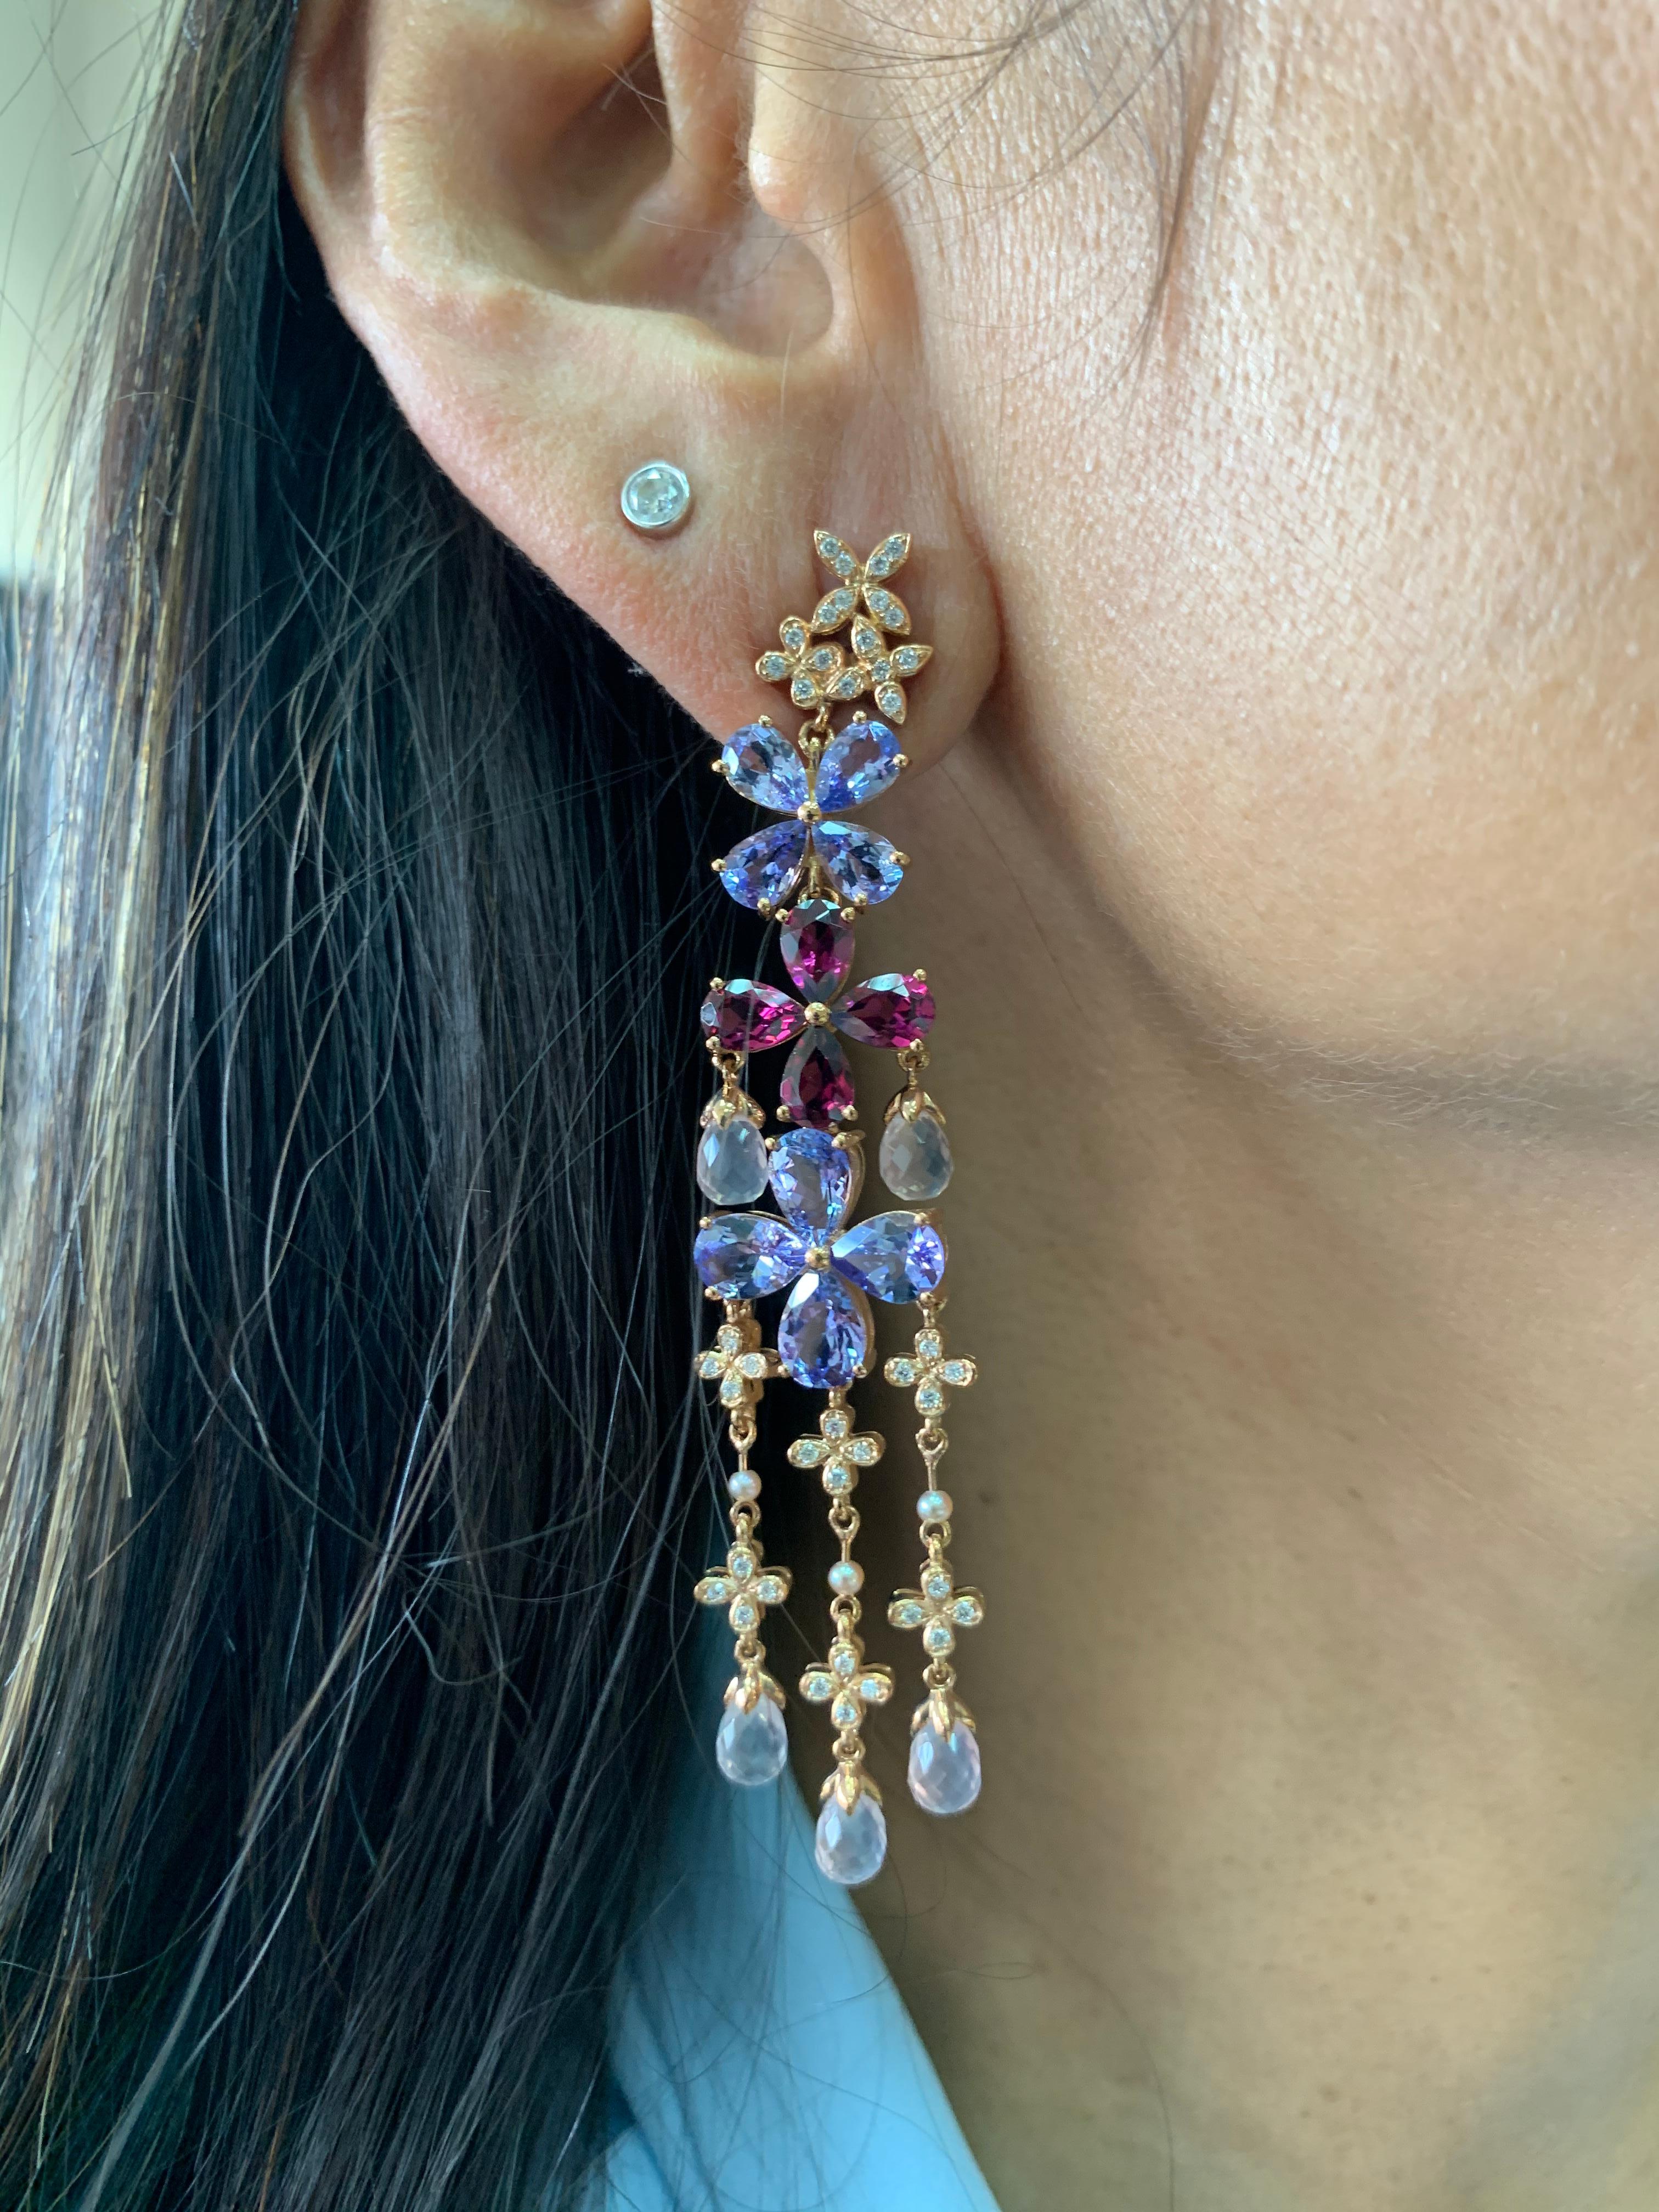 This earring is part of the exclusive Floral Fantasy Collection presented by Sunita Nahata. These simple floral designs are given an elegant touch with the multi layered architectural construction of the pieces. In addition, these rings are accented